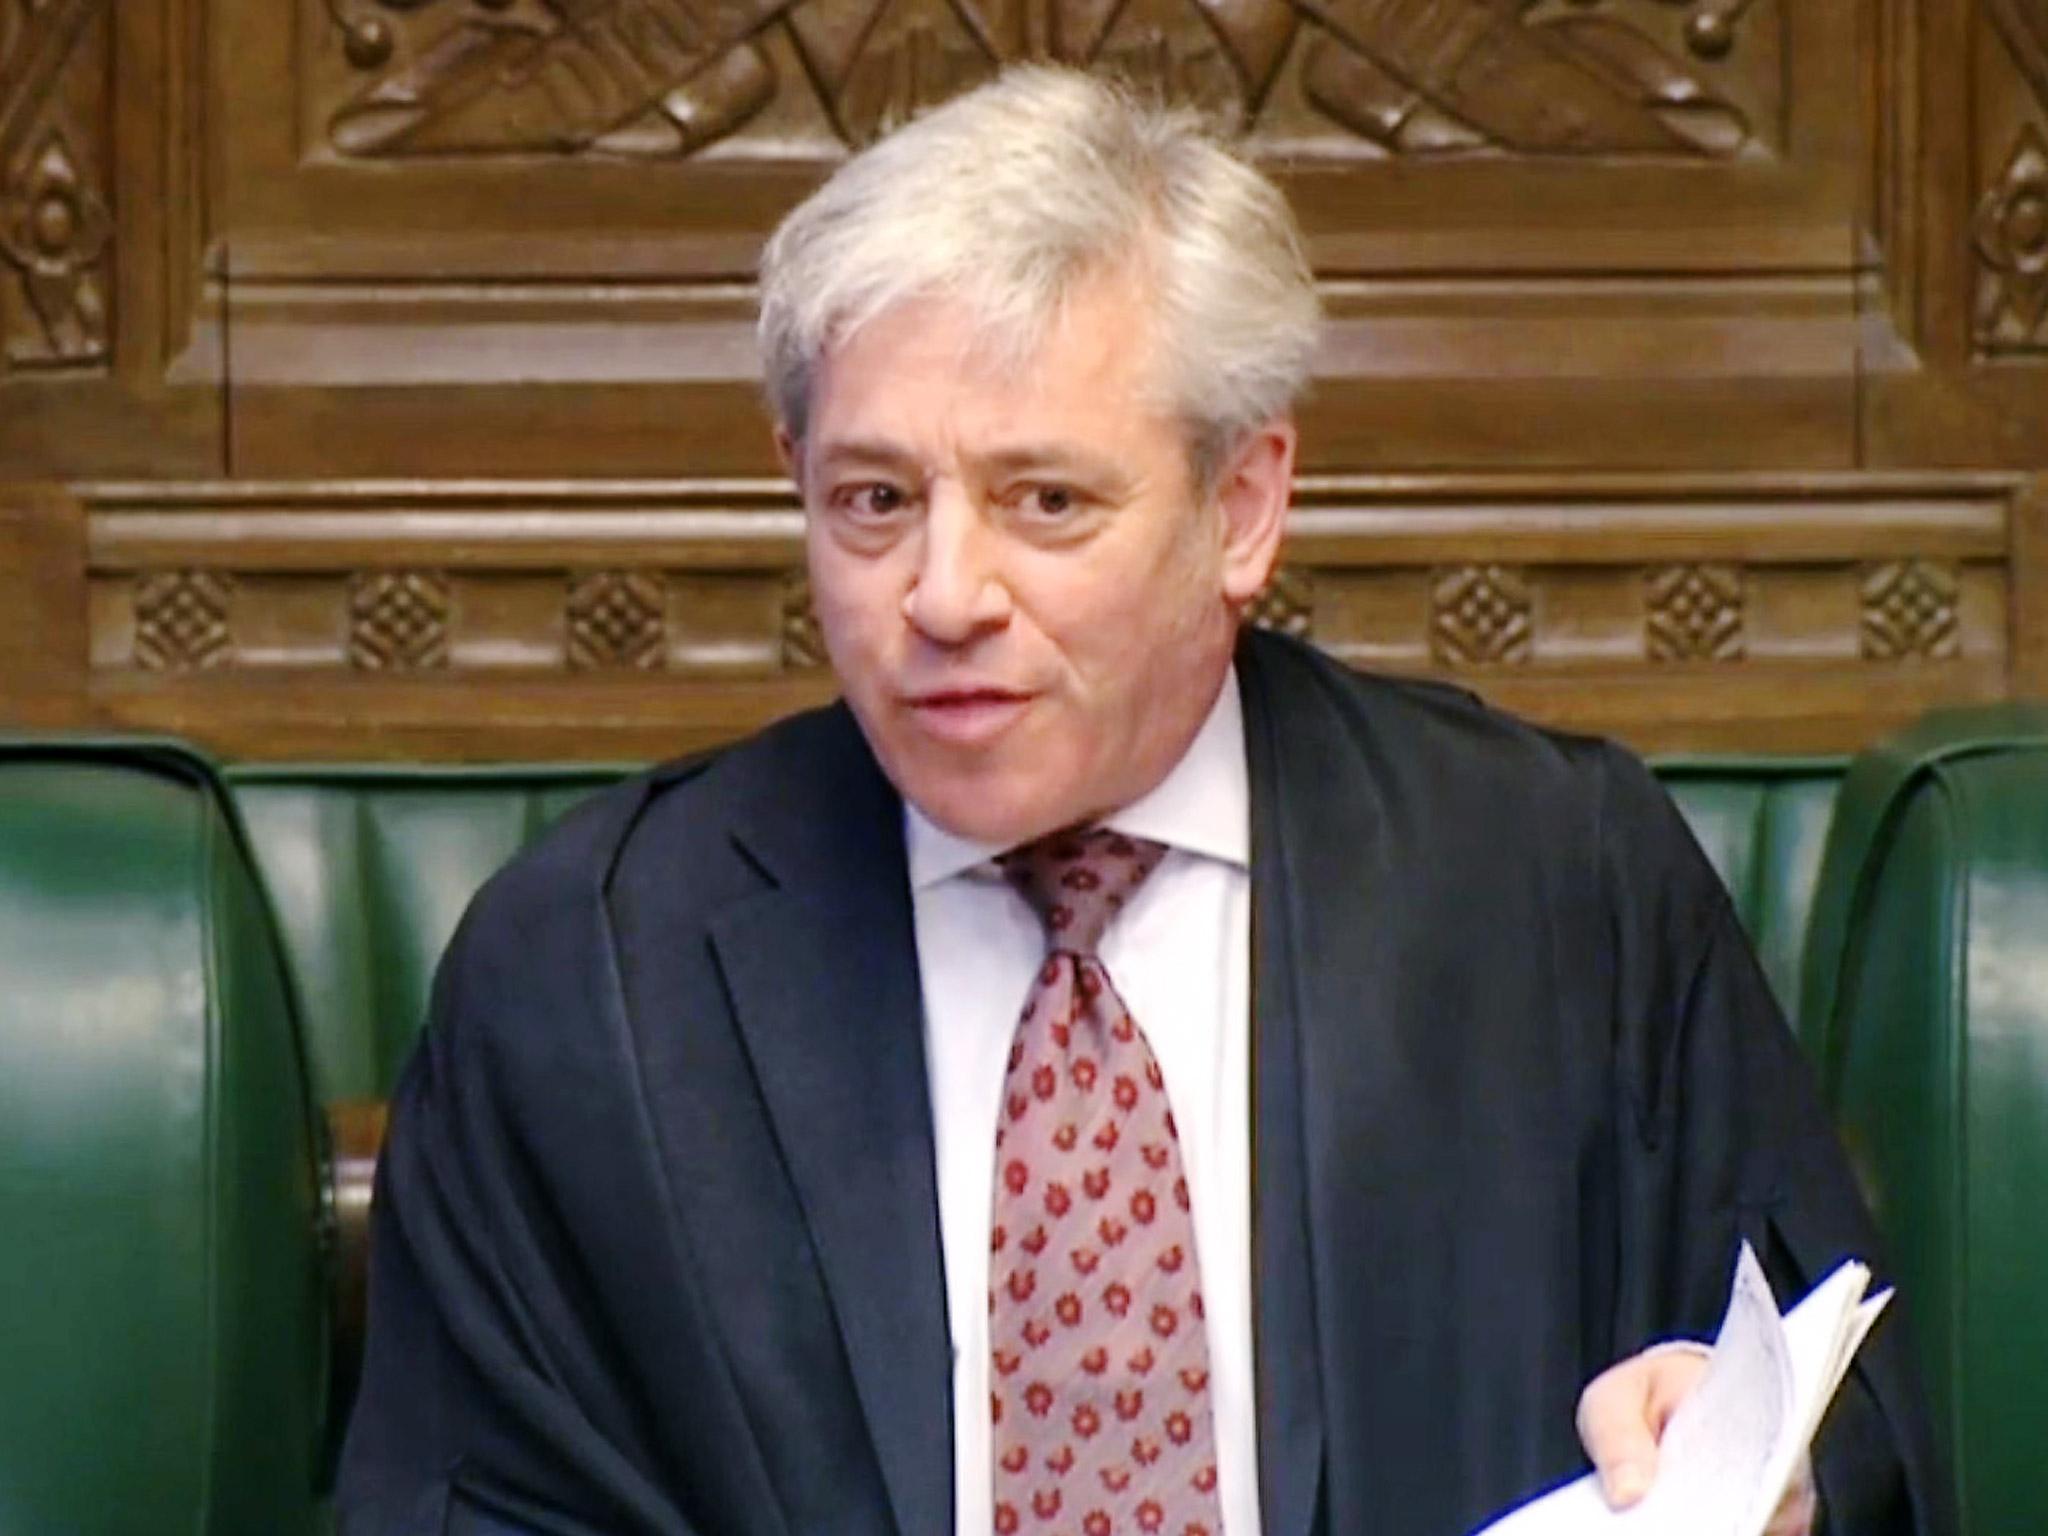 Commons Speaker John Bercow has been accused of calling a former staffer a "little girl"